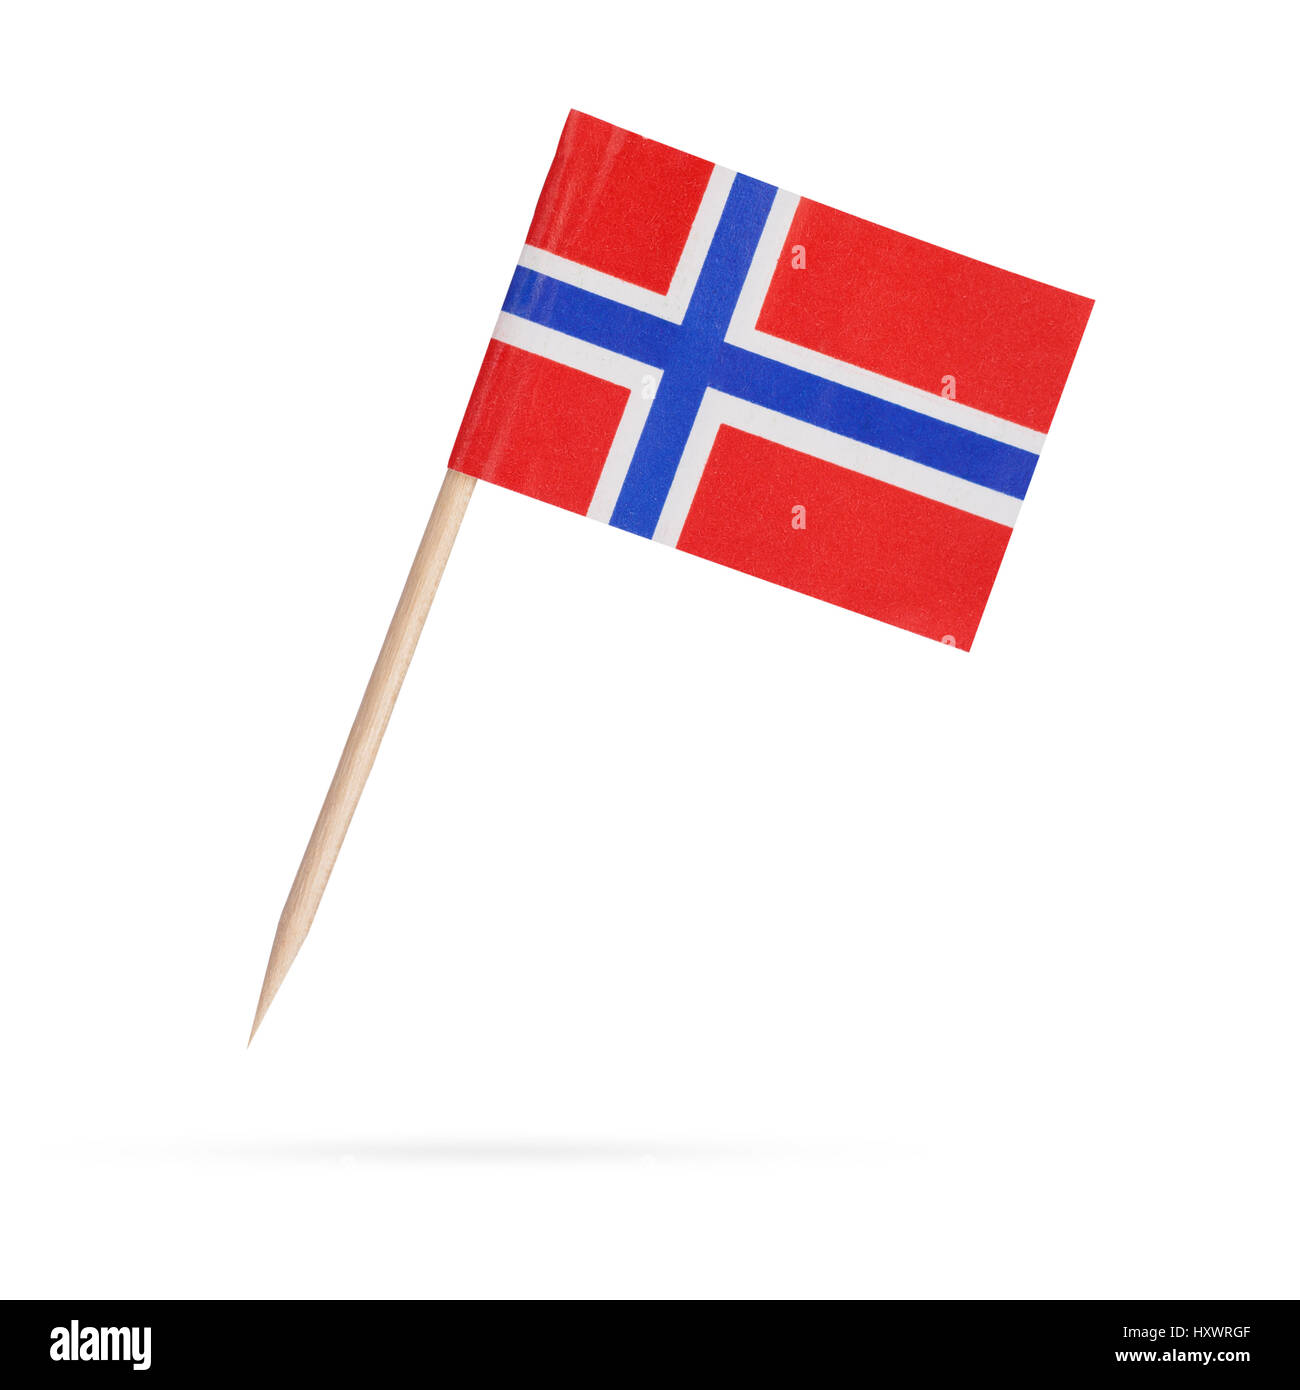 Miniature Paper Flag Norway Norwegian Flag Isolated On White Background With Shadow Below Stock Photo Alamy